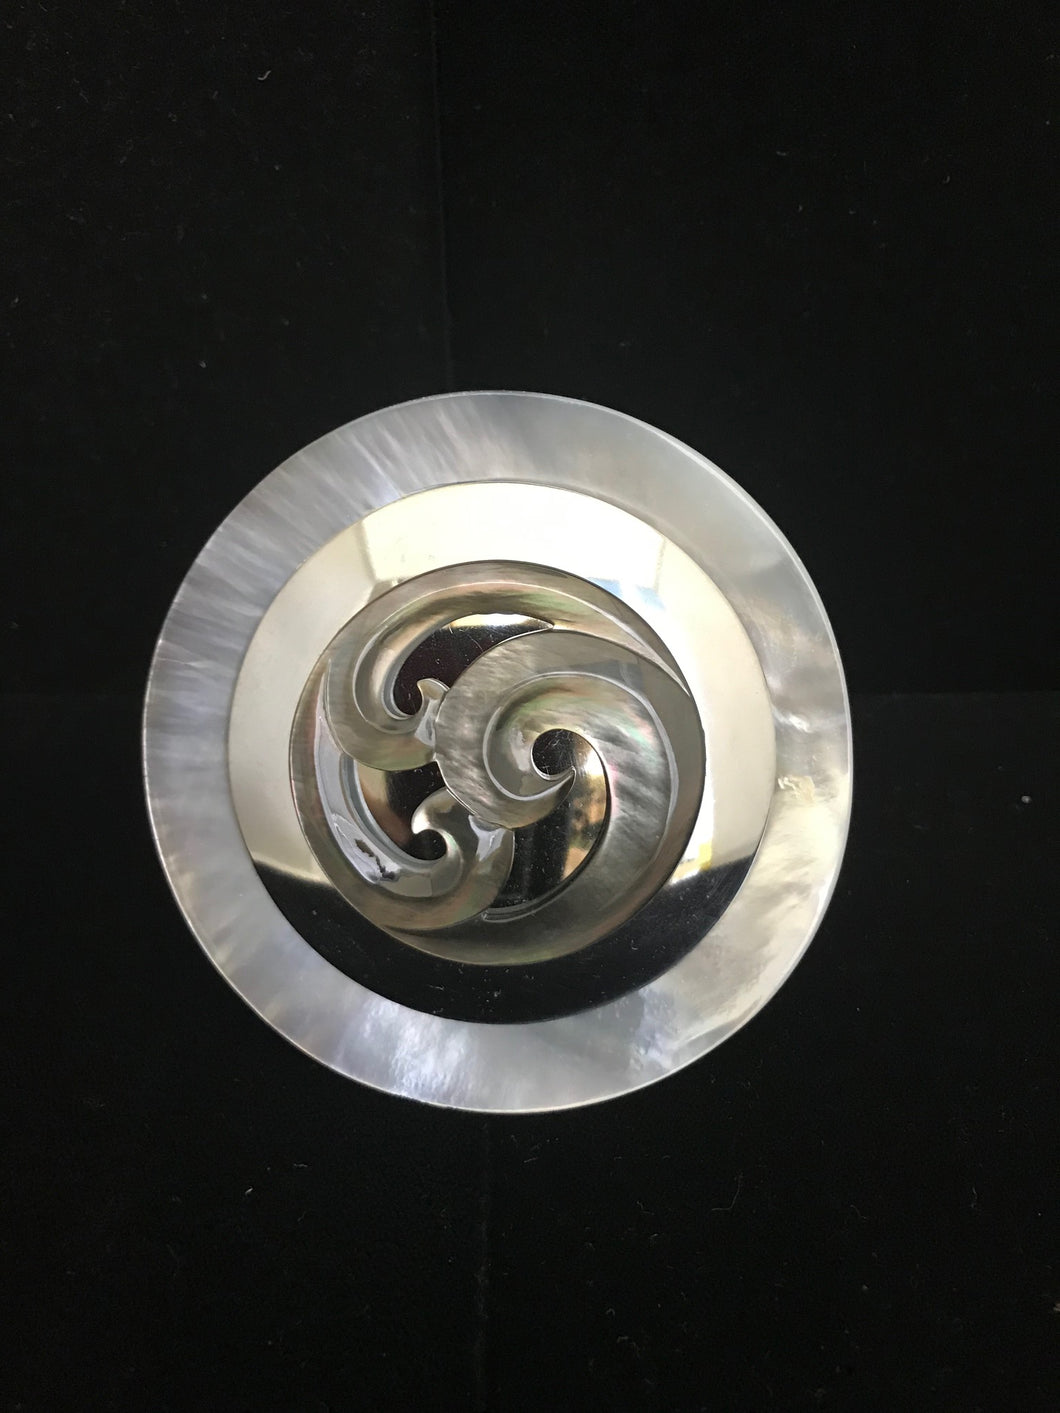 Mother of Pearl Swirl Magnet